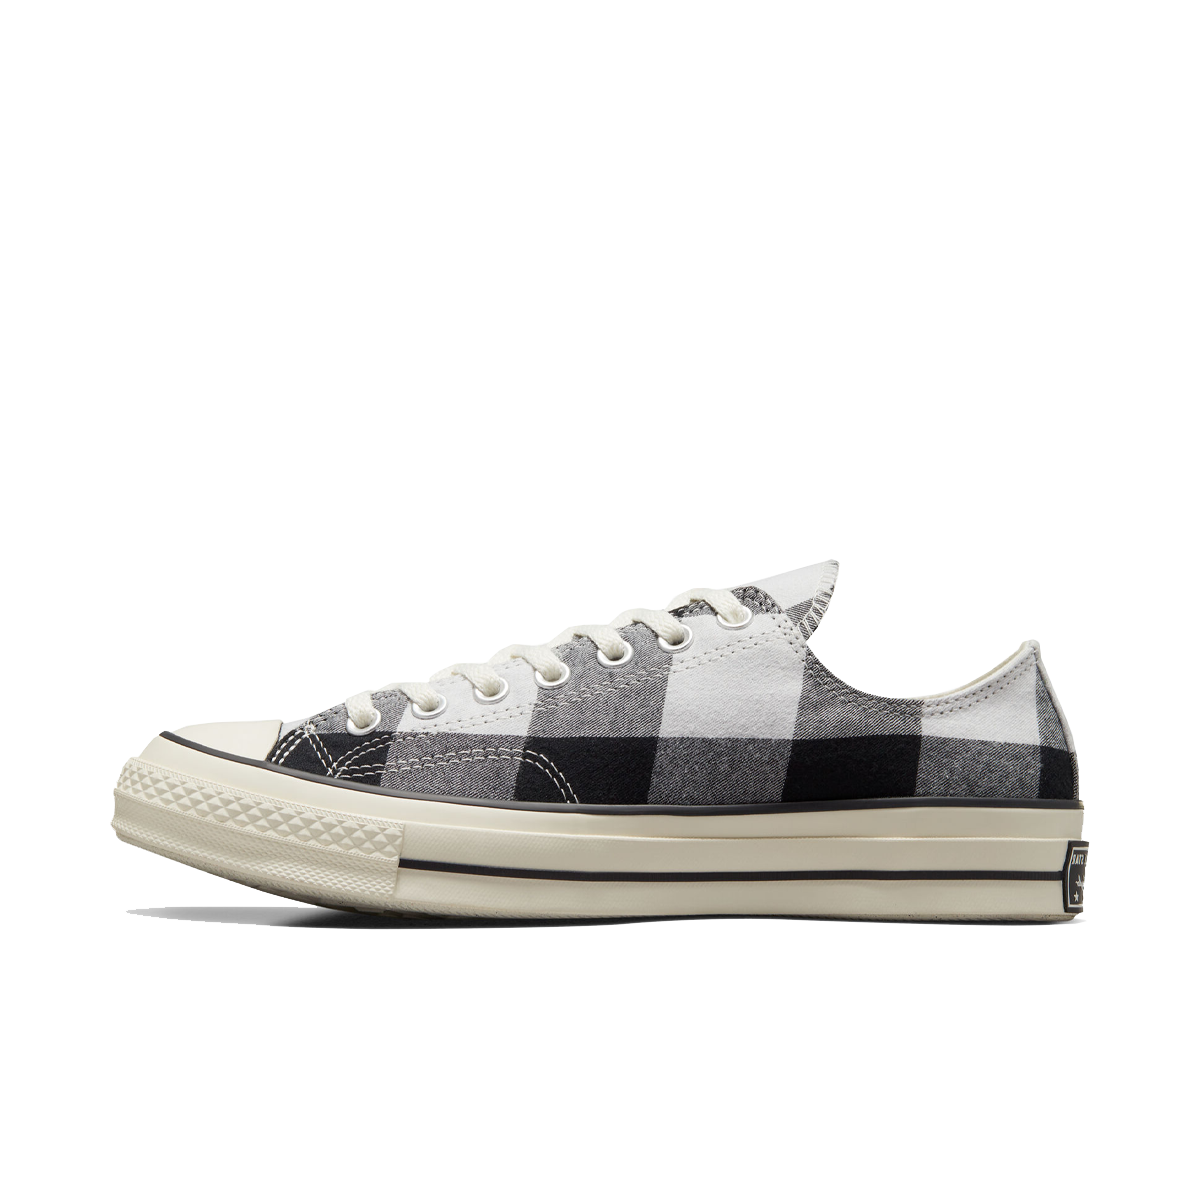 Converse Chuck 70 Low Upcycled 'Grey'